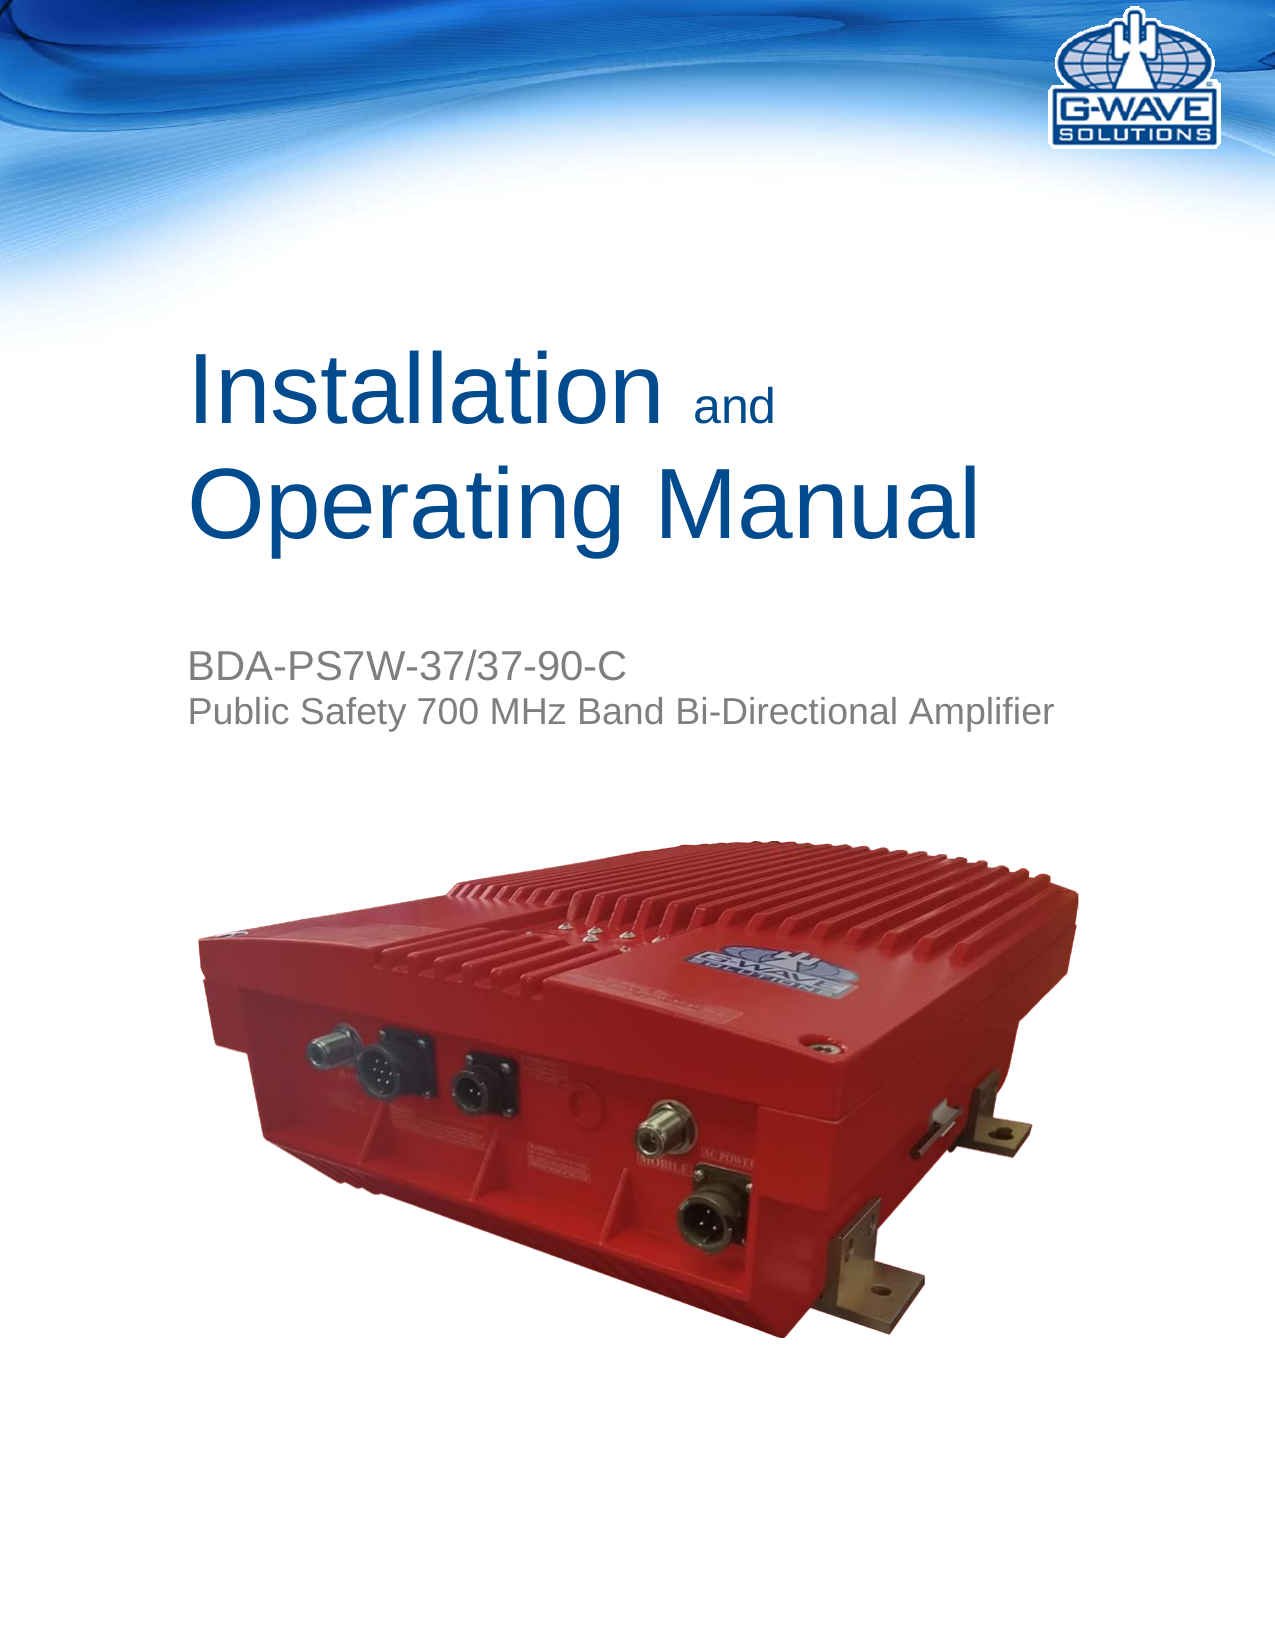       Installation and Operating Manual    BDA-PS7W-37/37-90-C Public Safety 700 MHz Band Bi-Directional Amplifier    